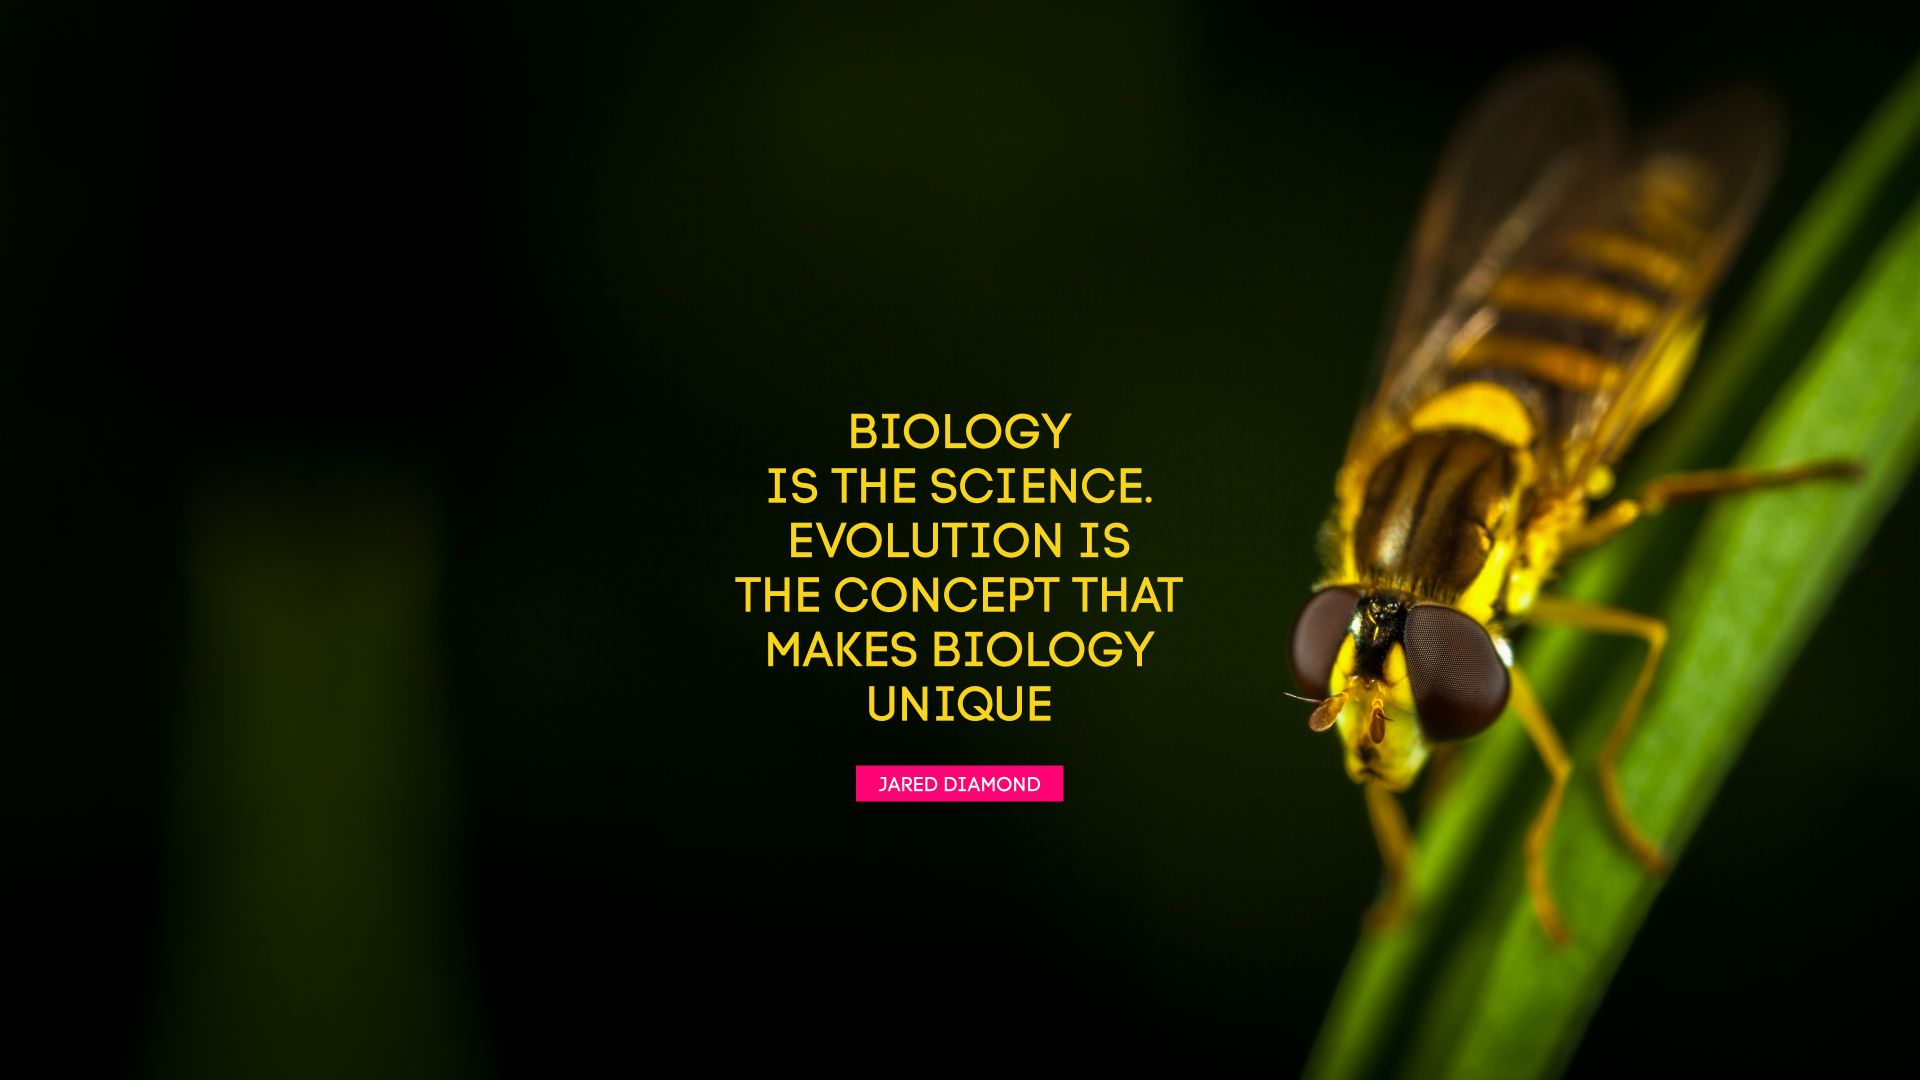 Biology is the science. Evolution is the concept that makes biology unique. - Quote by Jared Diamond